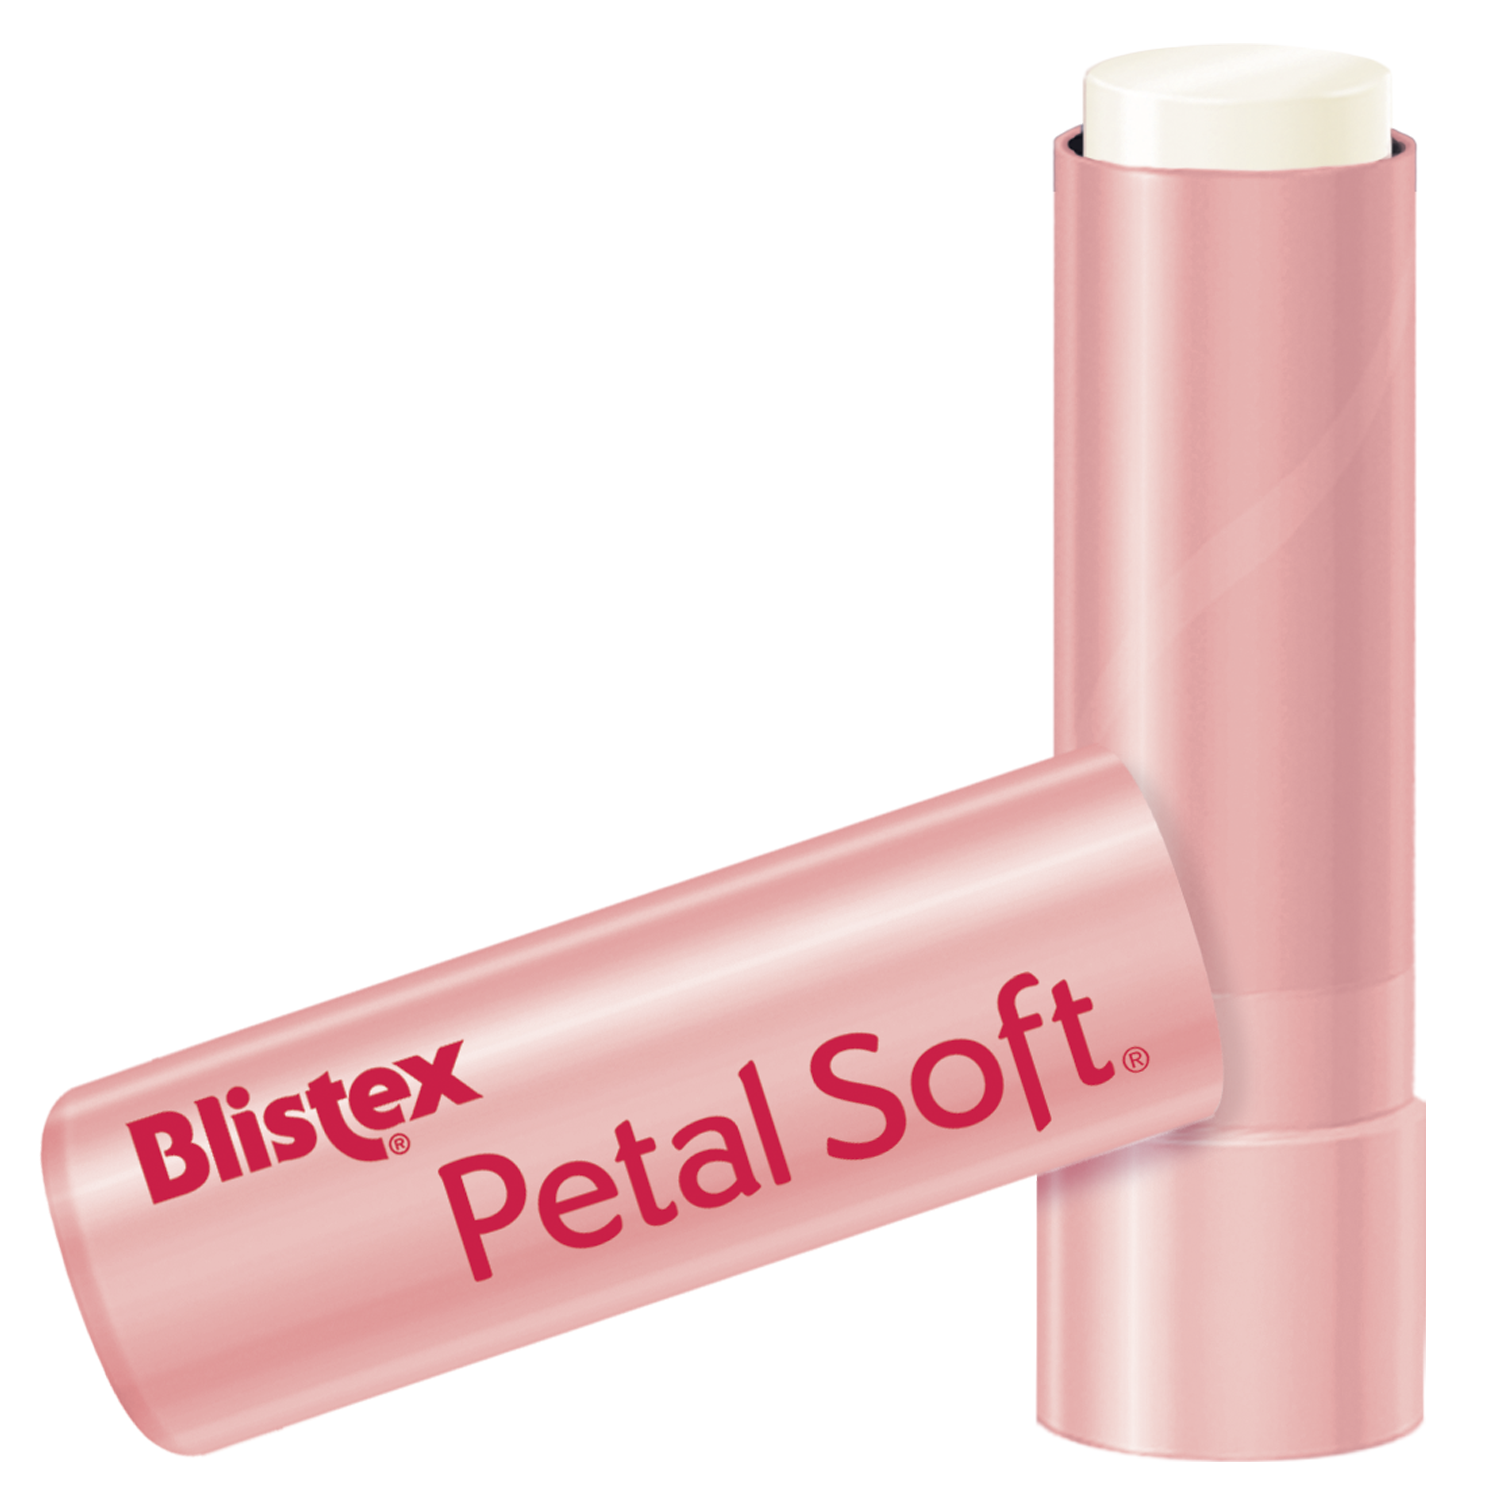 Blistex Petal Soft Lip Balm with Natural Flower Extracts - image 3 of 4